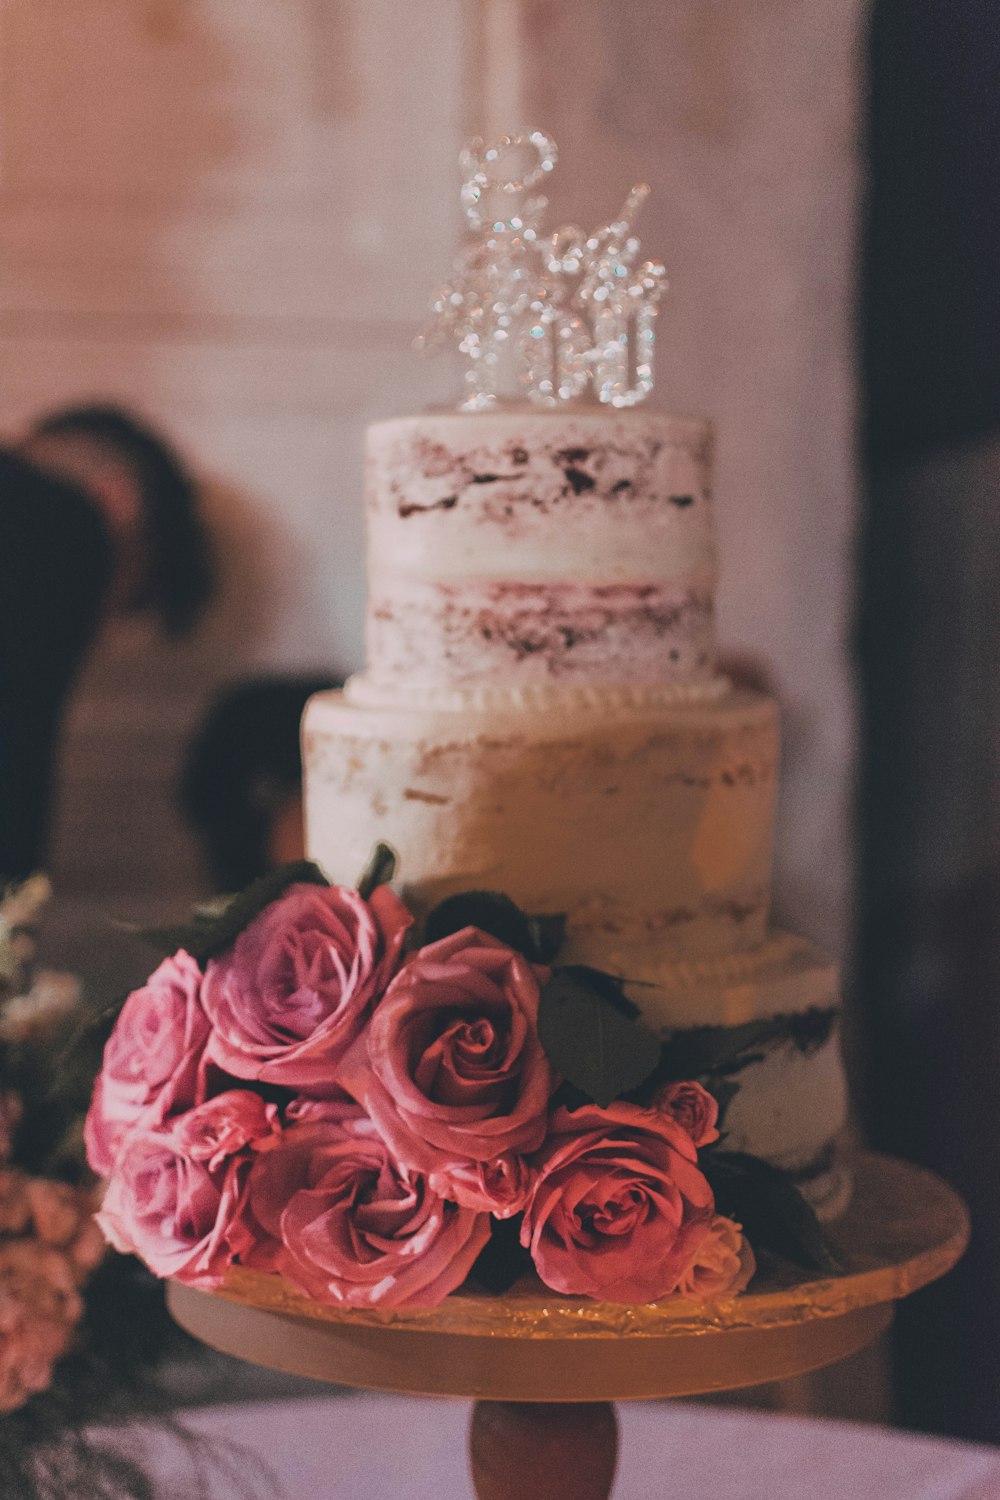 3-layer cake with rose accent